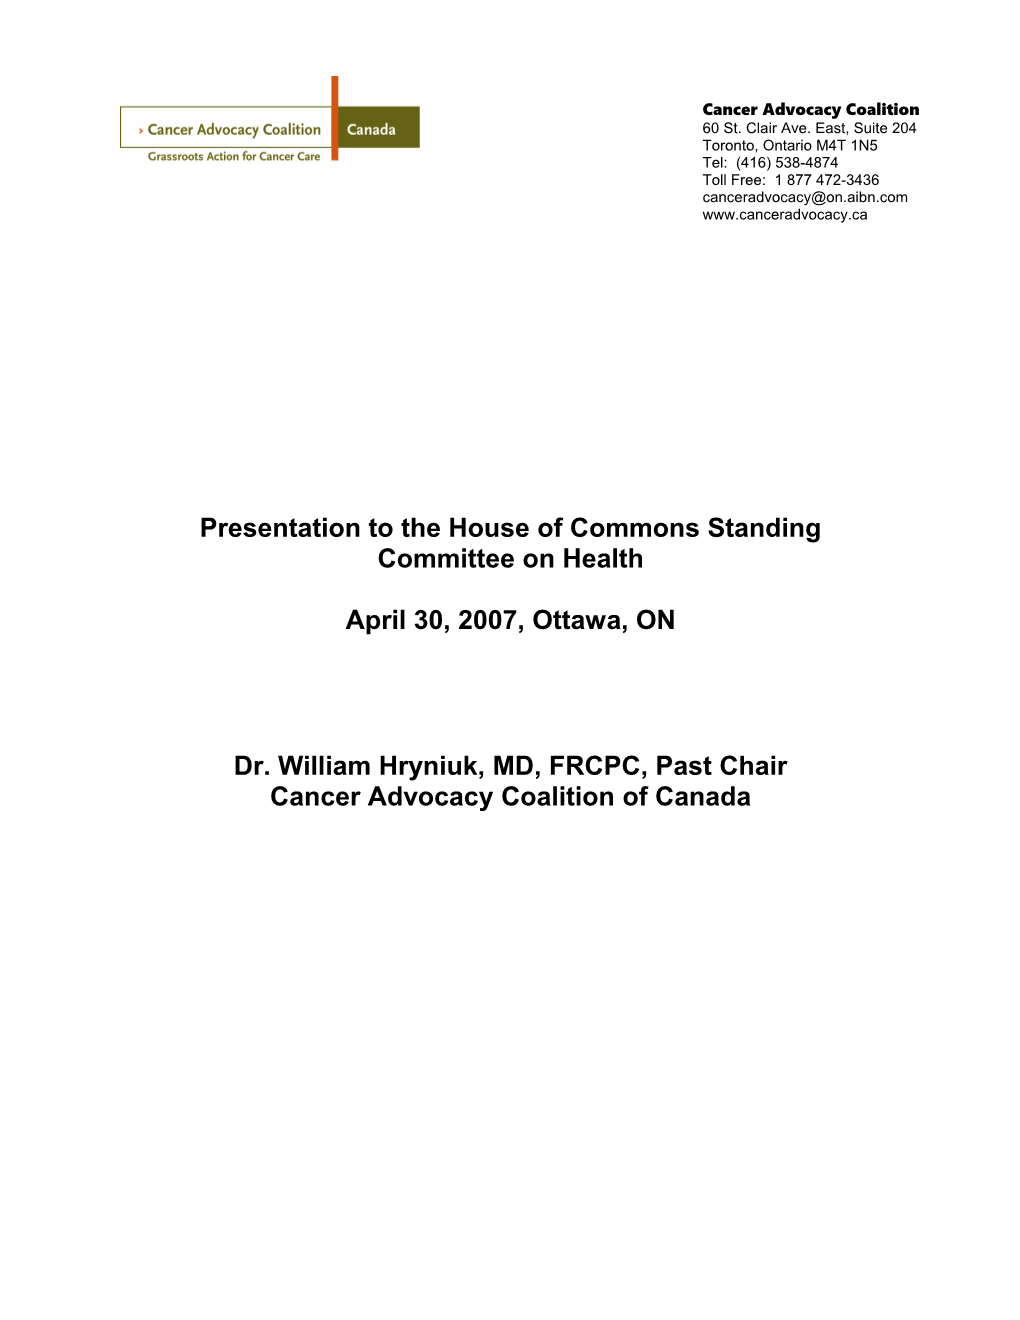 Presentation to the House of Commons Standing Committee on Health